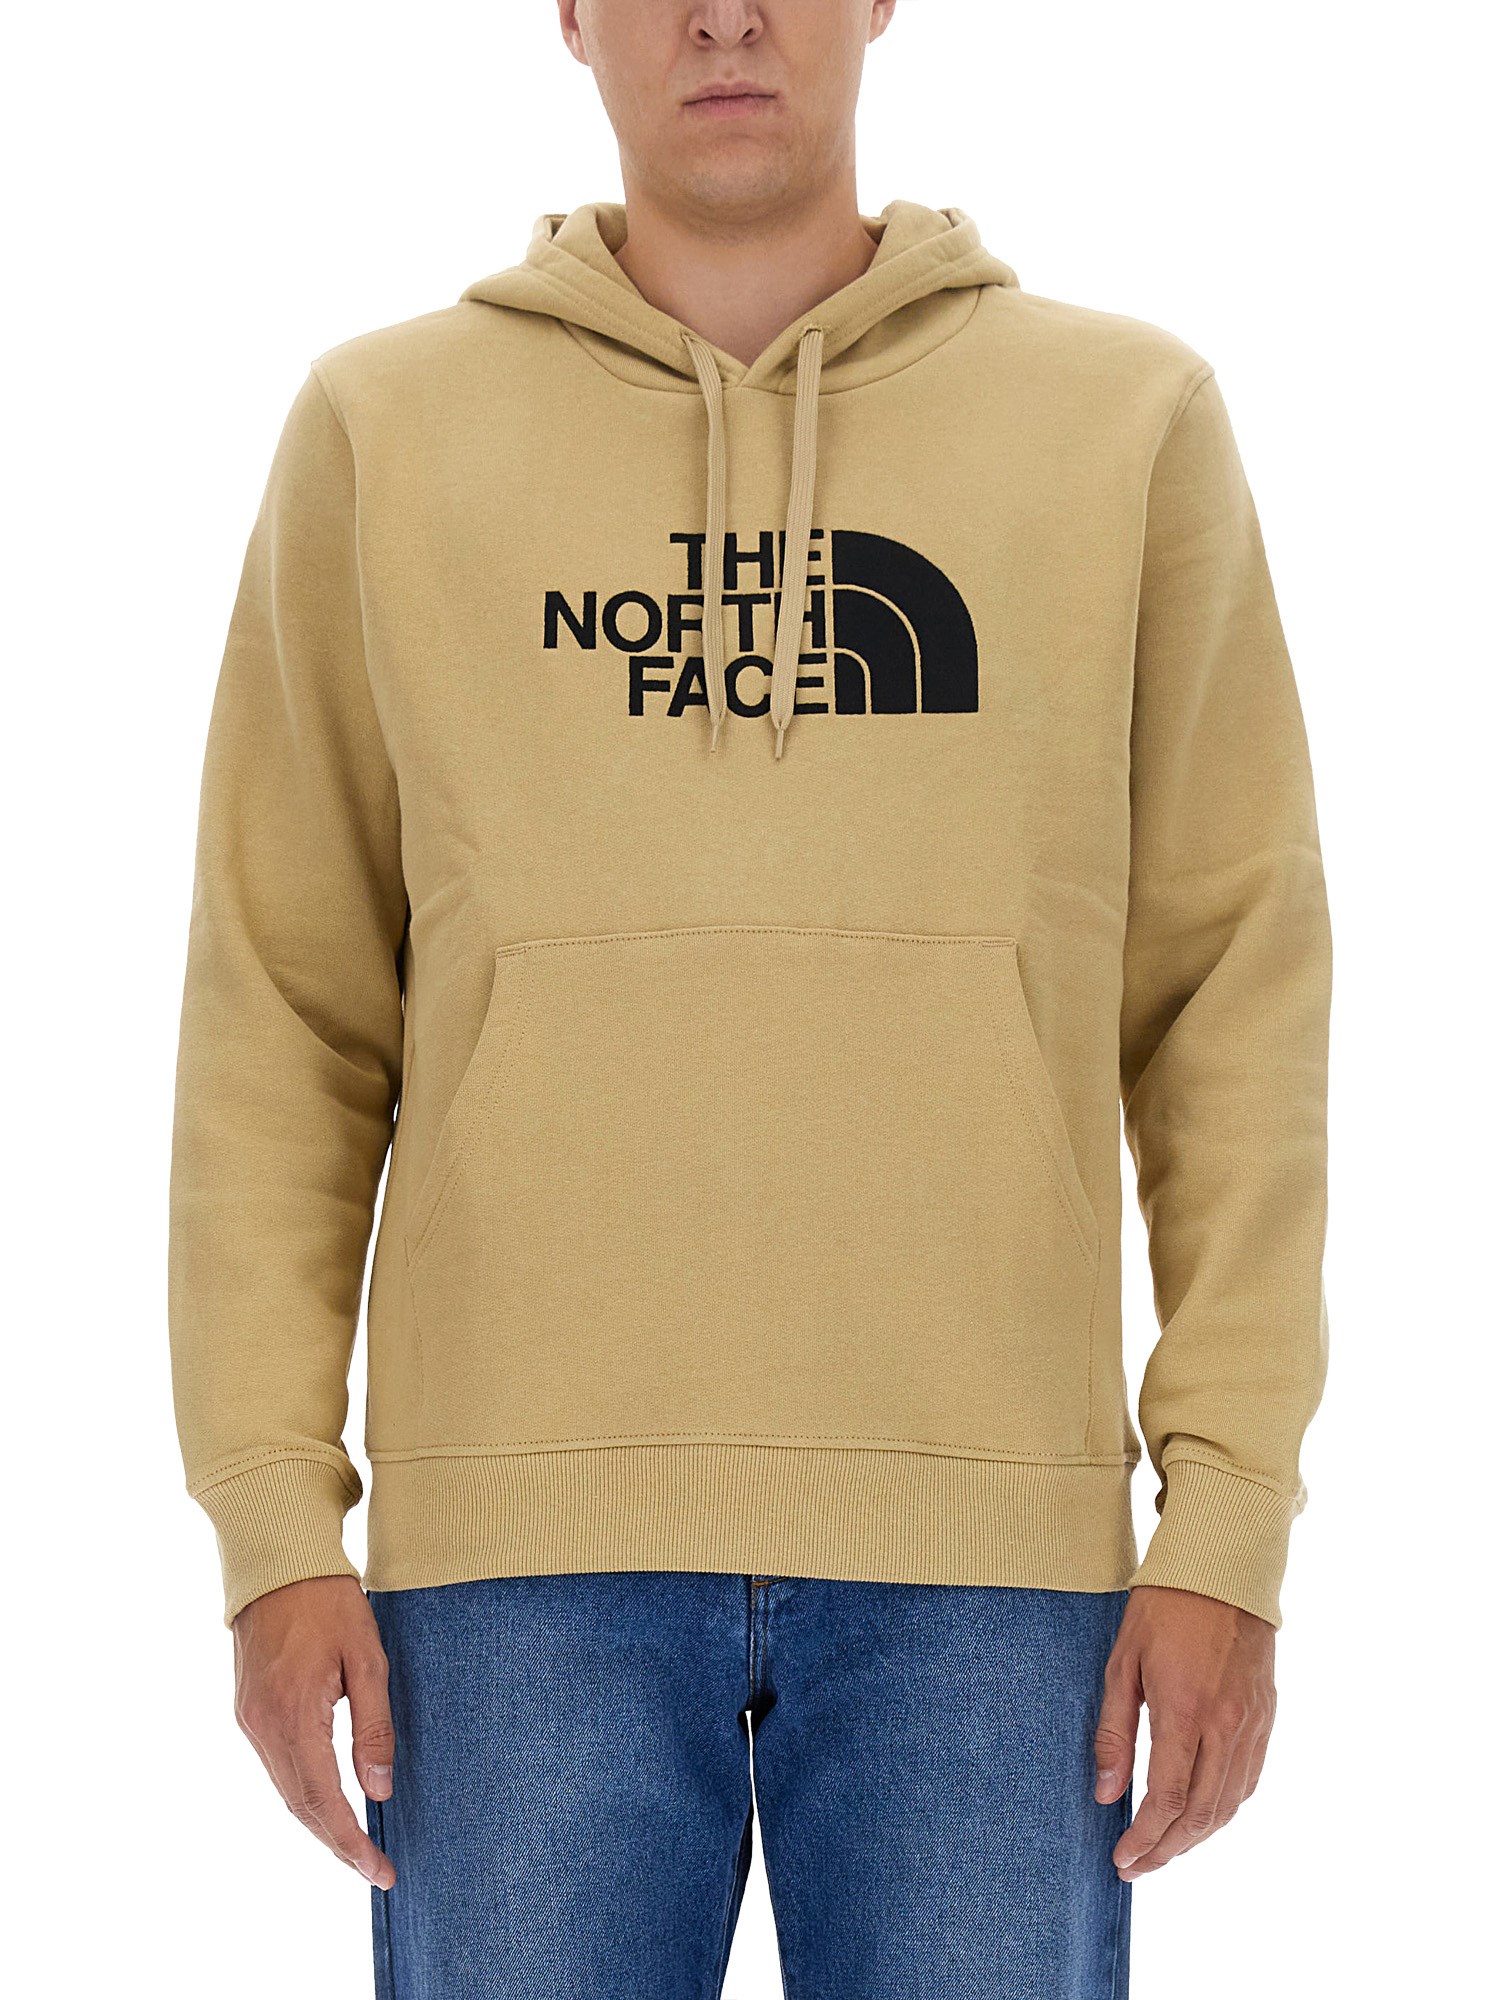 the north face sweatshirt with logo